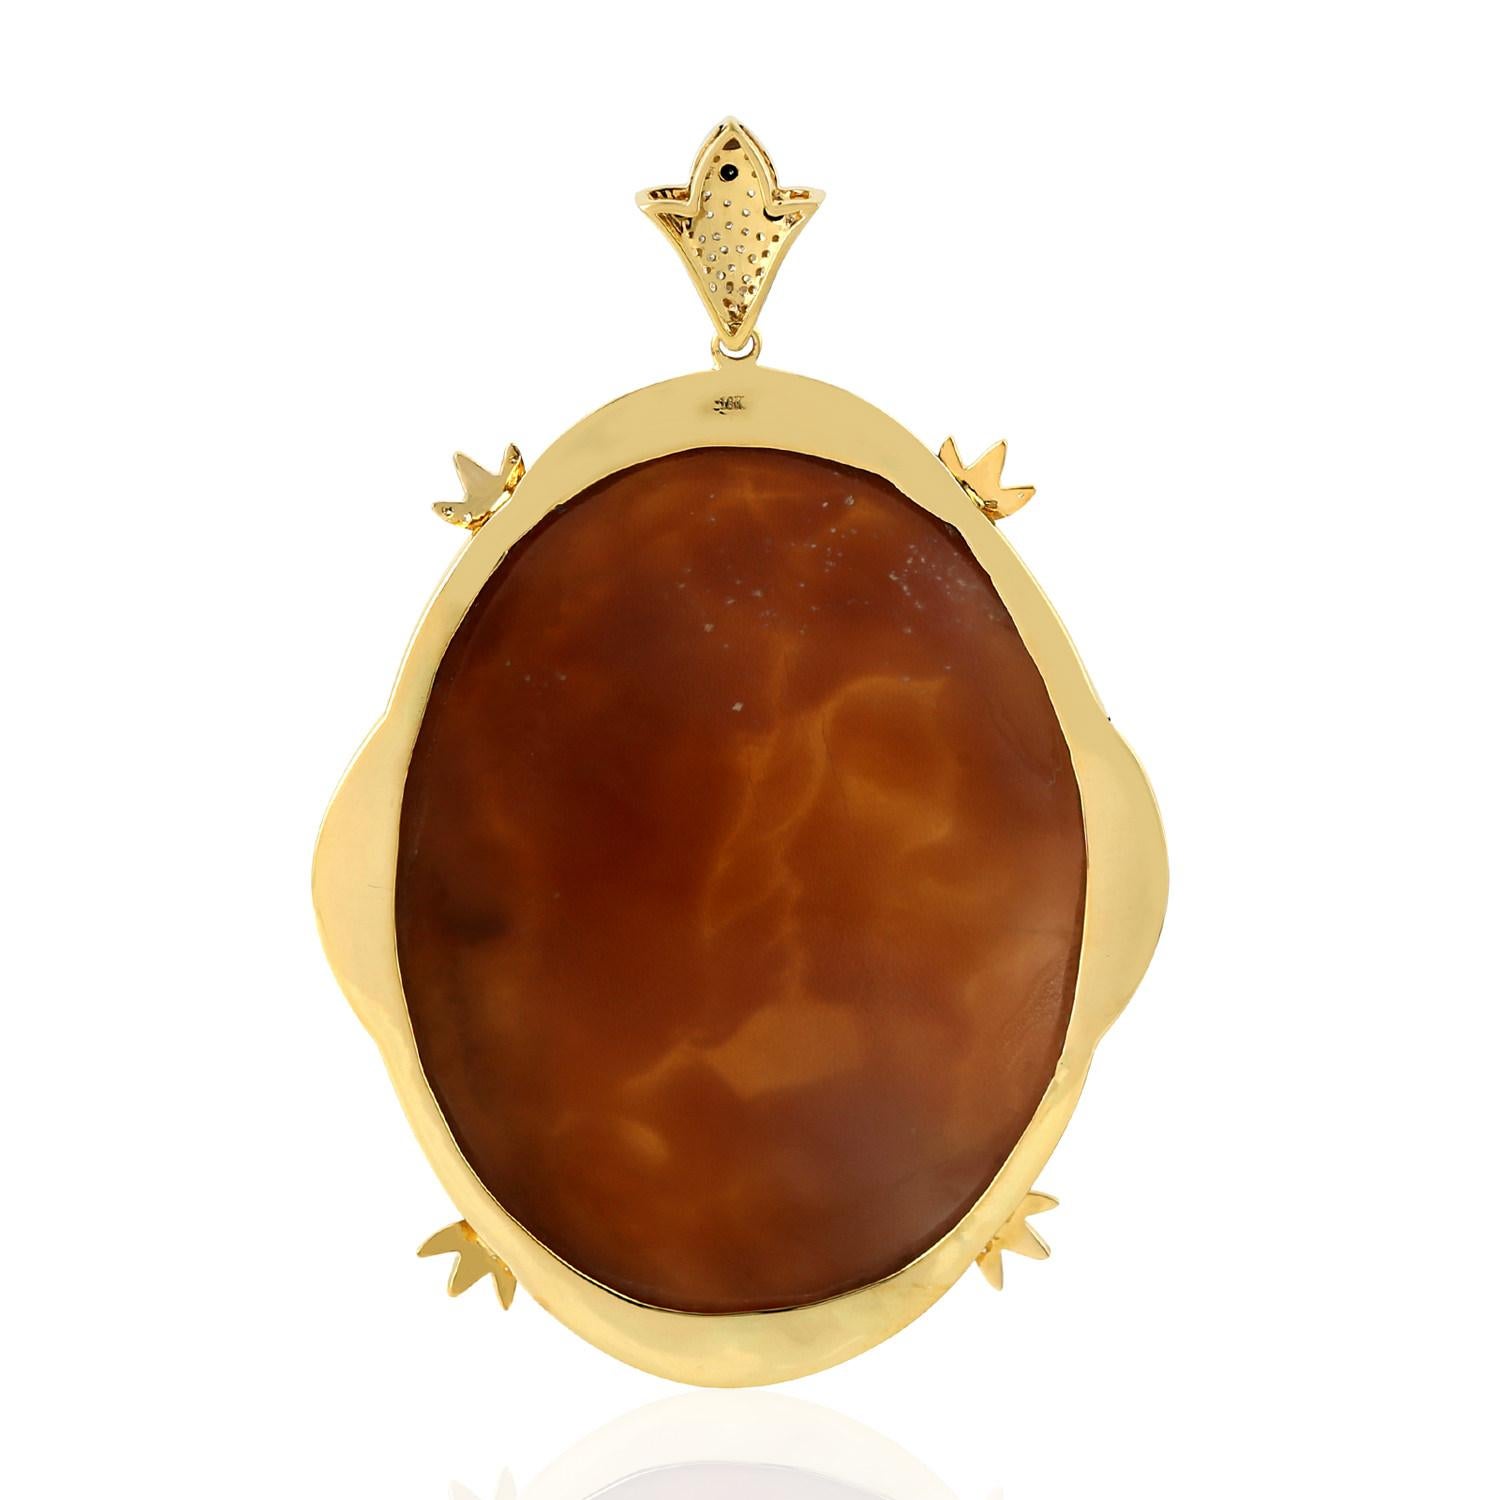 Cast in 18 karat gold. This beautiful cameo pendant necklace is set with 73.12 carats cameo shell and 1.57 carats of sparkling diamonds. 

FOLLOW  MEGHNA JEWELS storefront to view the latest collection & exclusive pieces.  Meghna Jewels is proudly